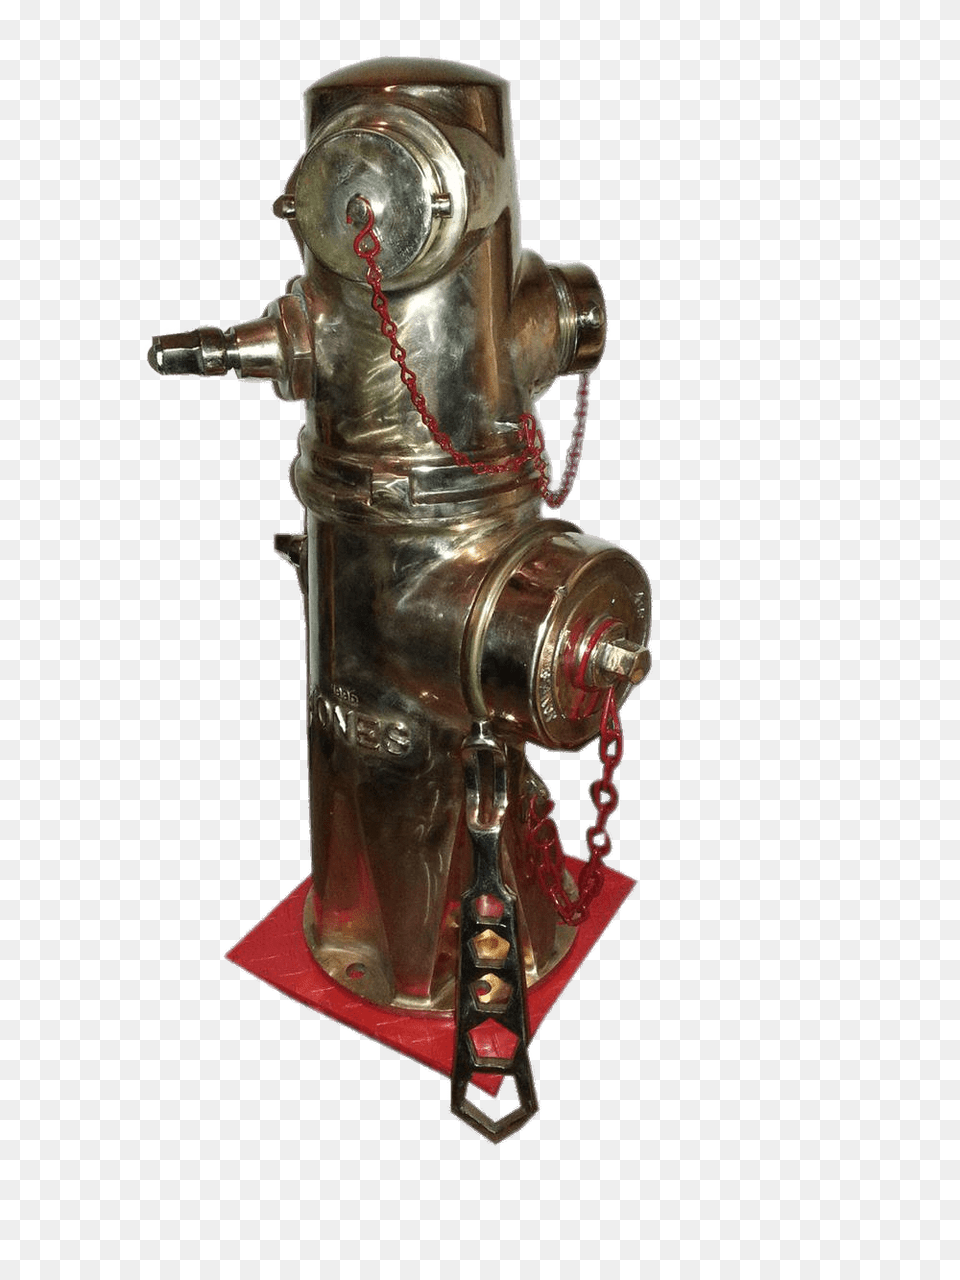 Solid Brass Fire Hydrant, Bronze, Fire Hydrant Png